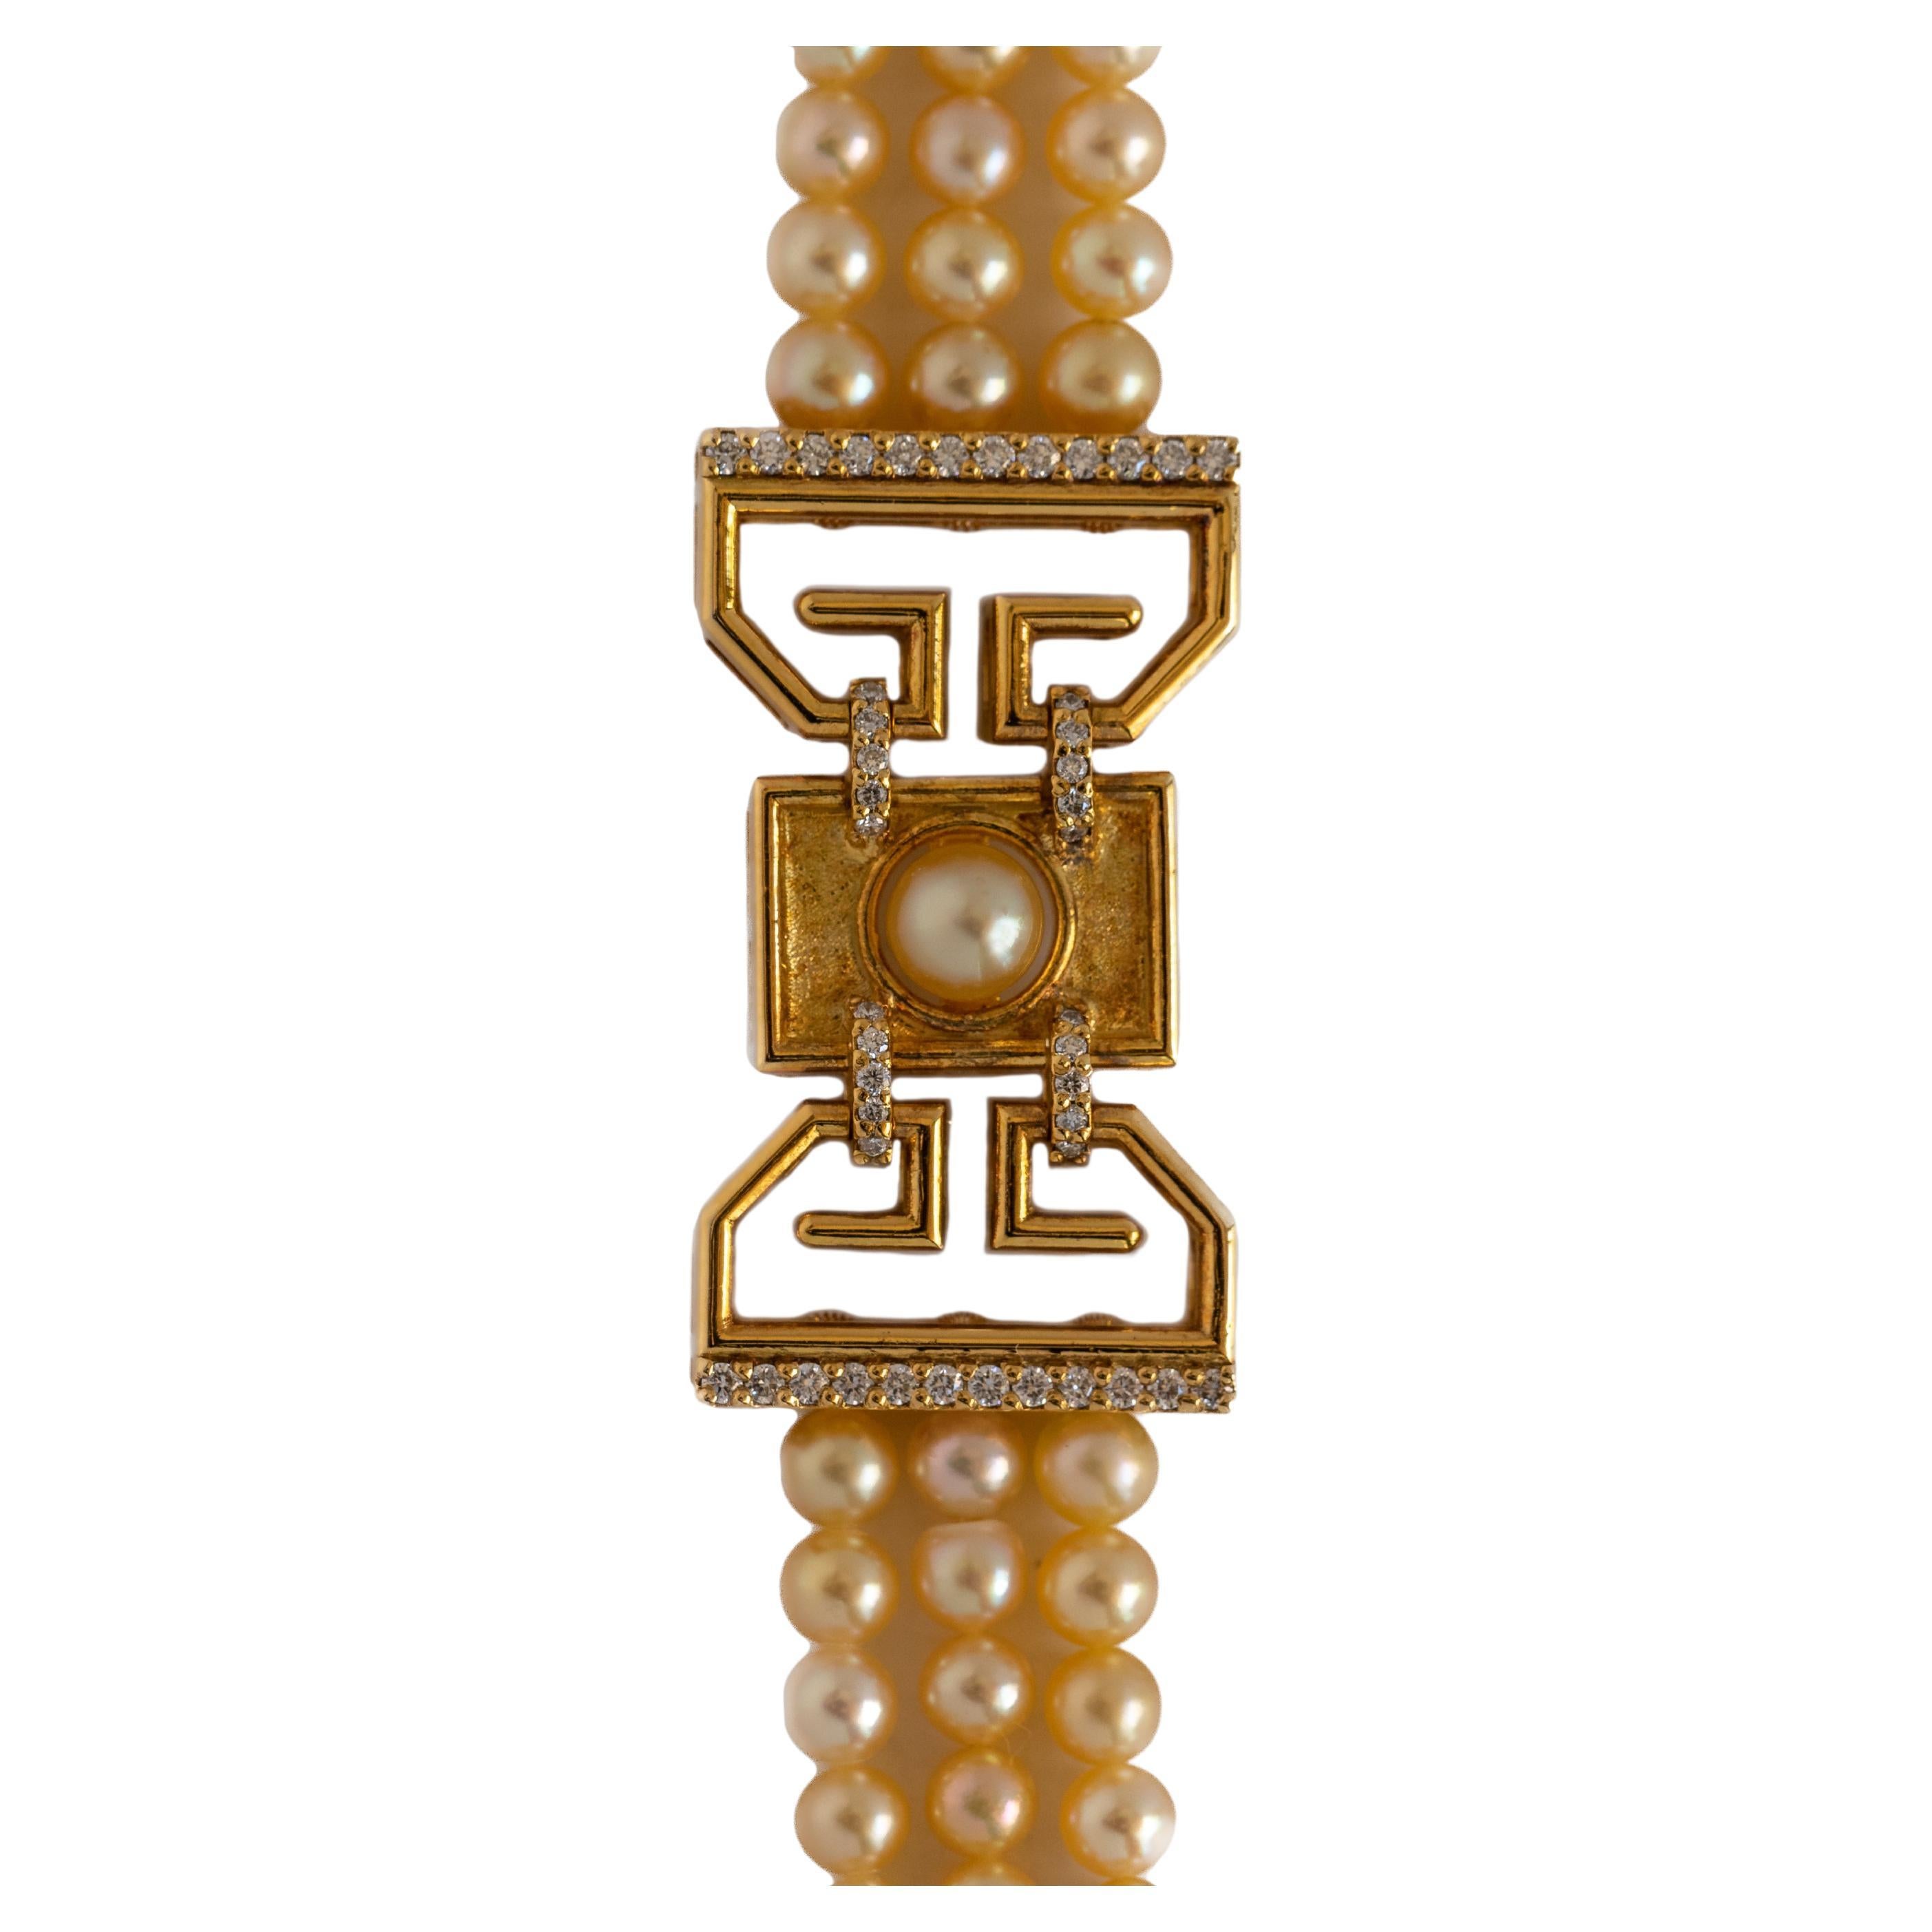 Certified Natural Bahraini Pearls and Diamonds Art Deco Bracelet in 18 Kt Yellow